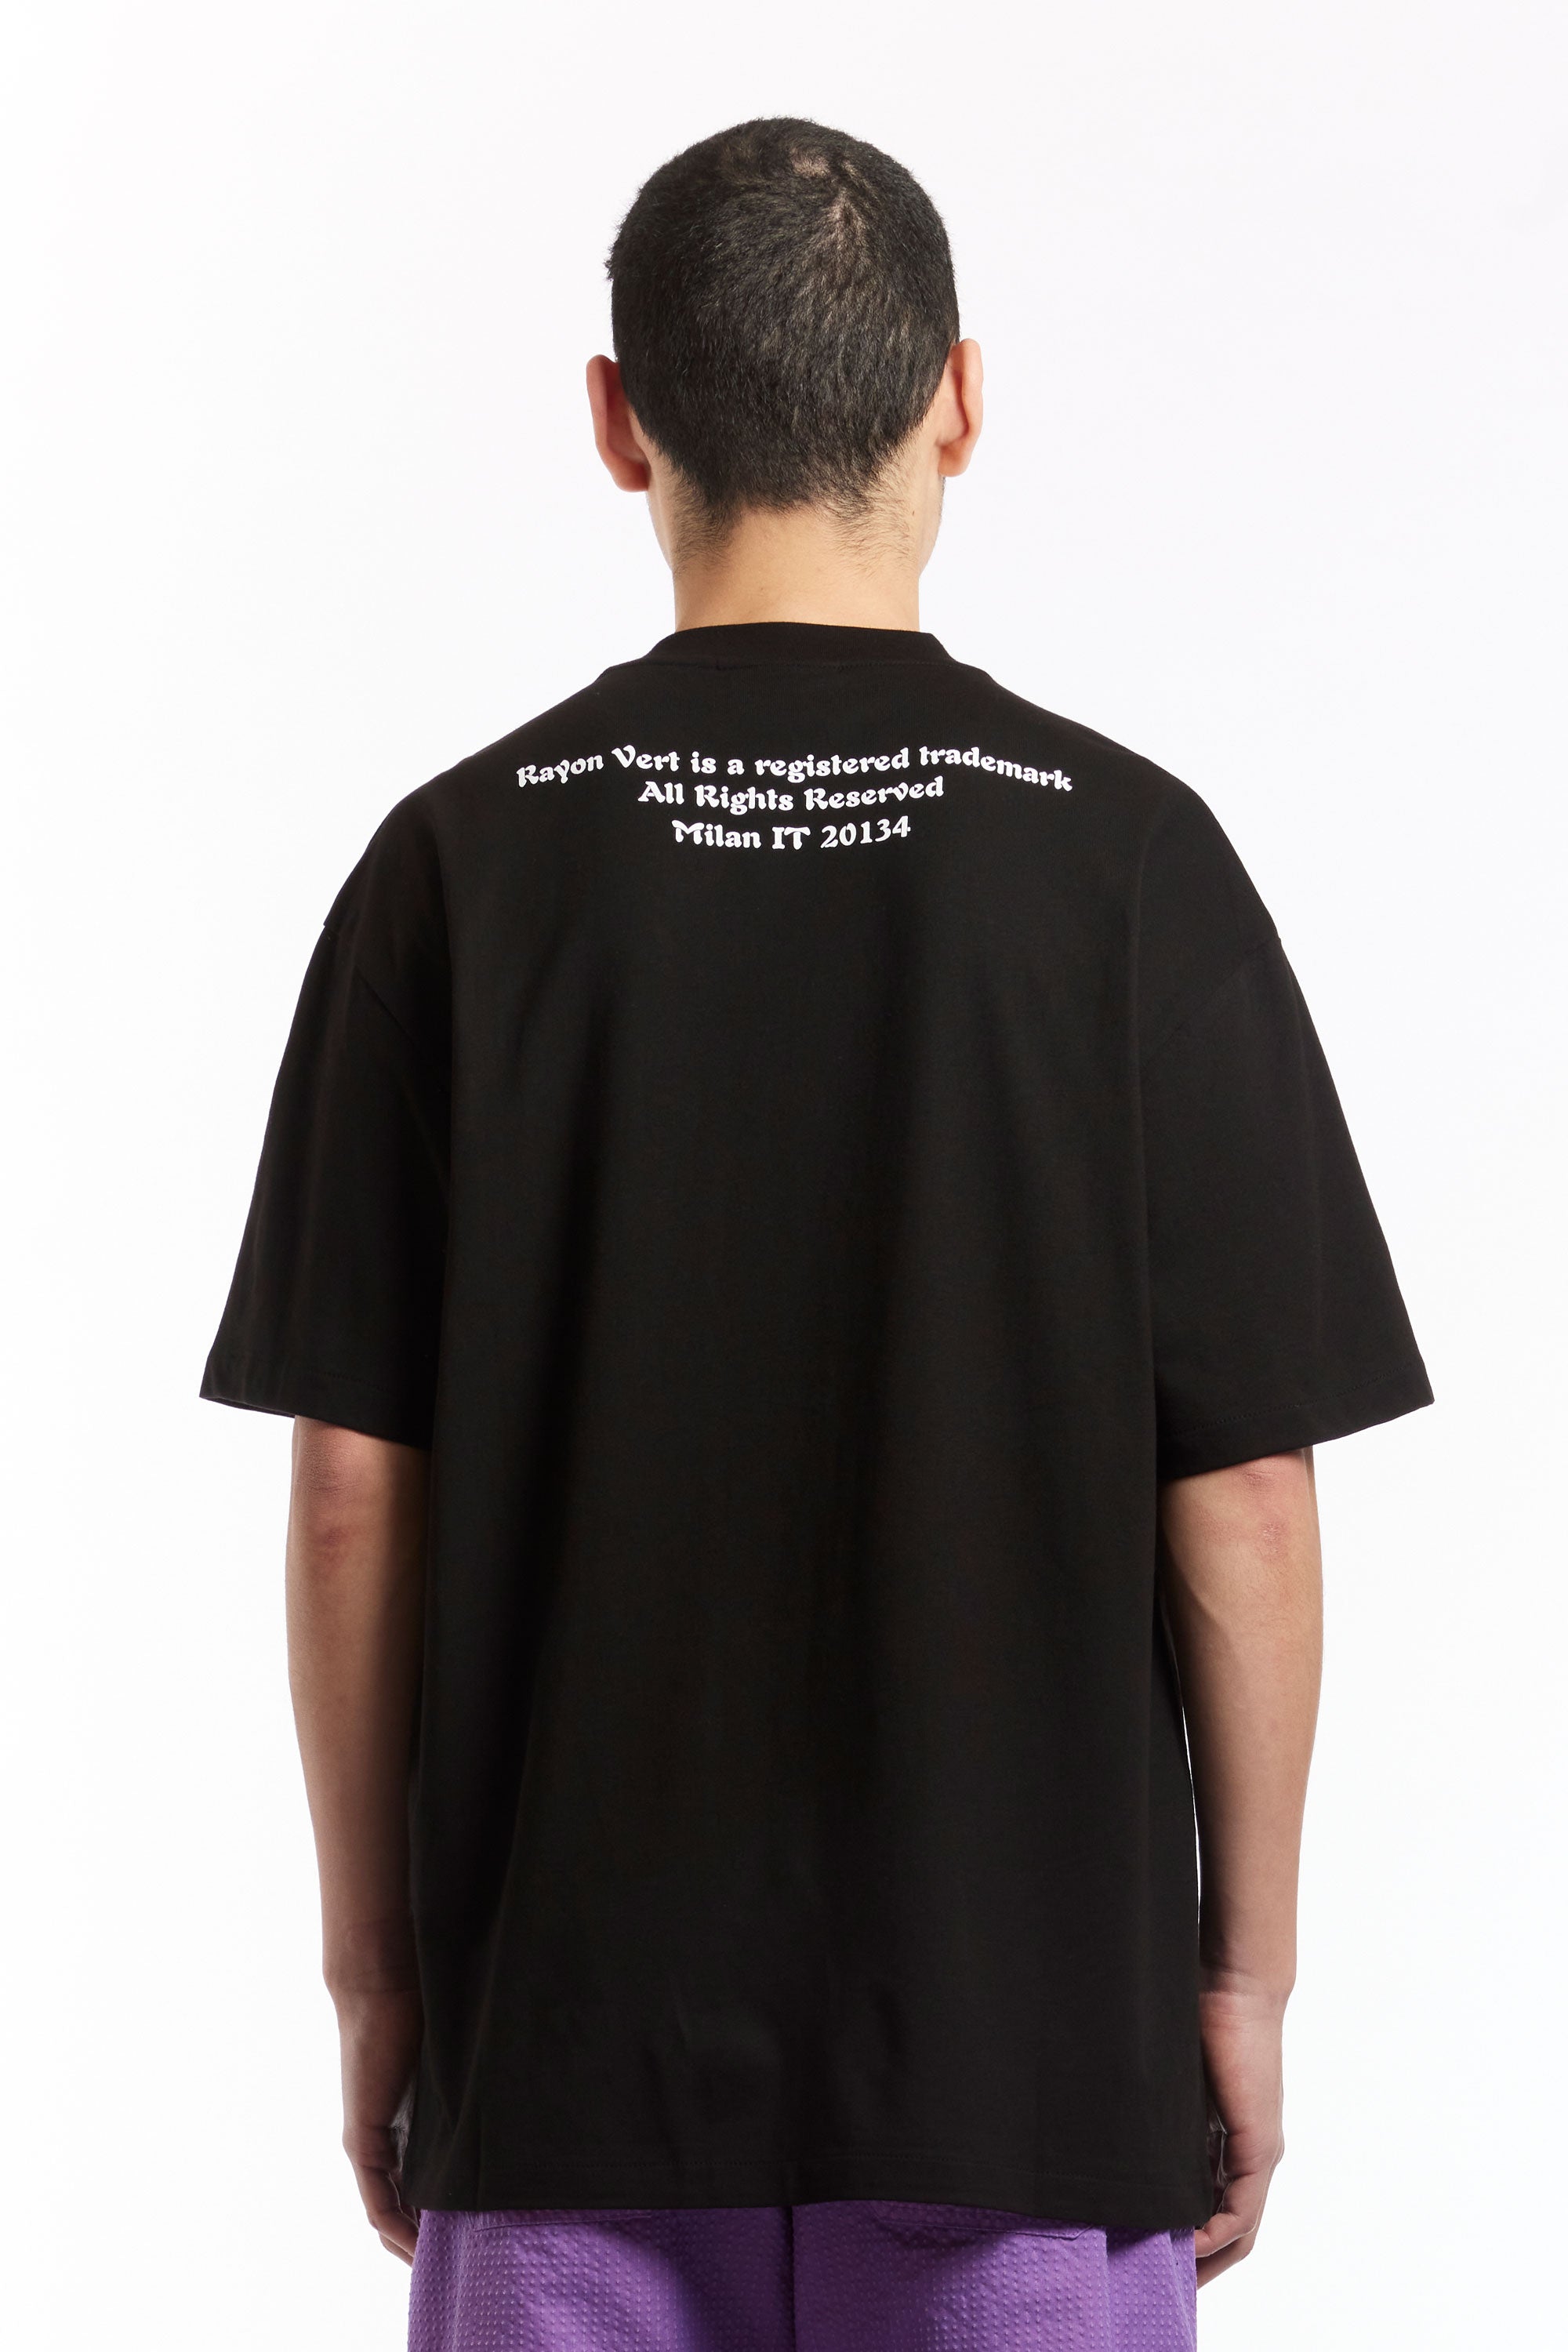 The RAYON VERT - TRADING T-SHIRT  available online with global shipping, and in PAM Stores Melbourne and Sydney.